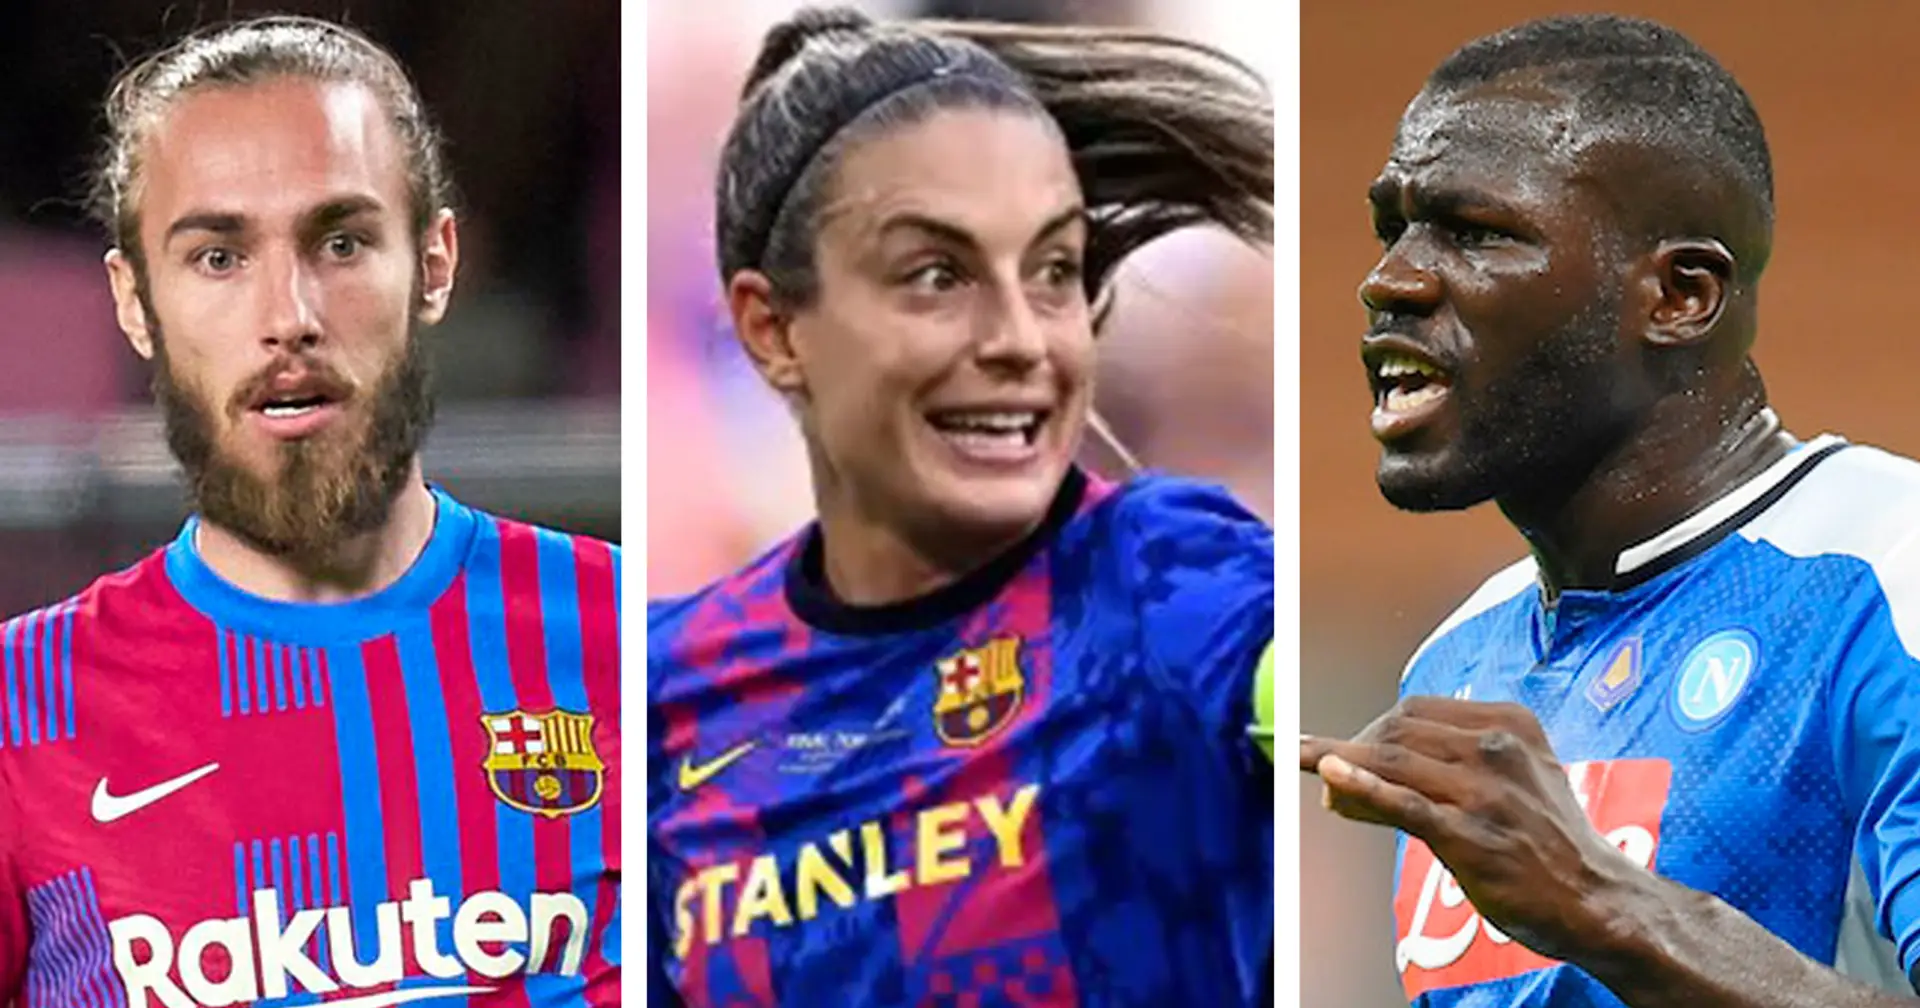 Barca Femeni complete the treble and 3 more under-radar stories of the day